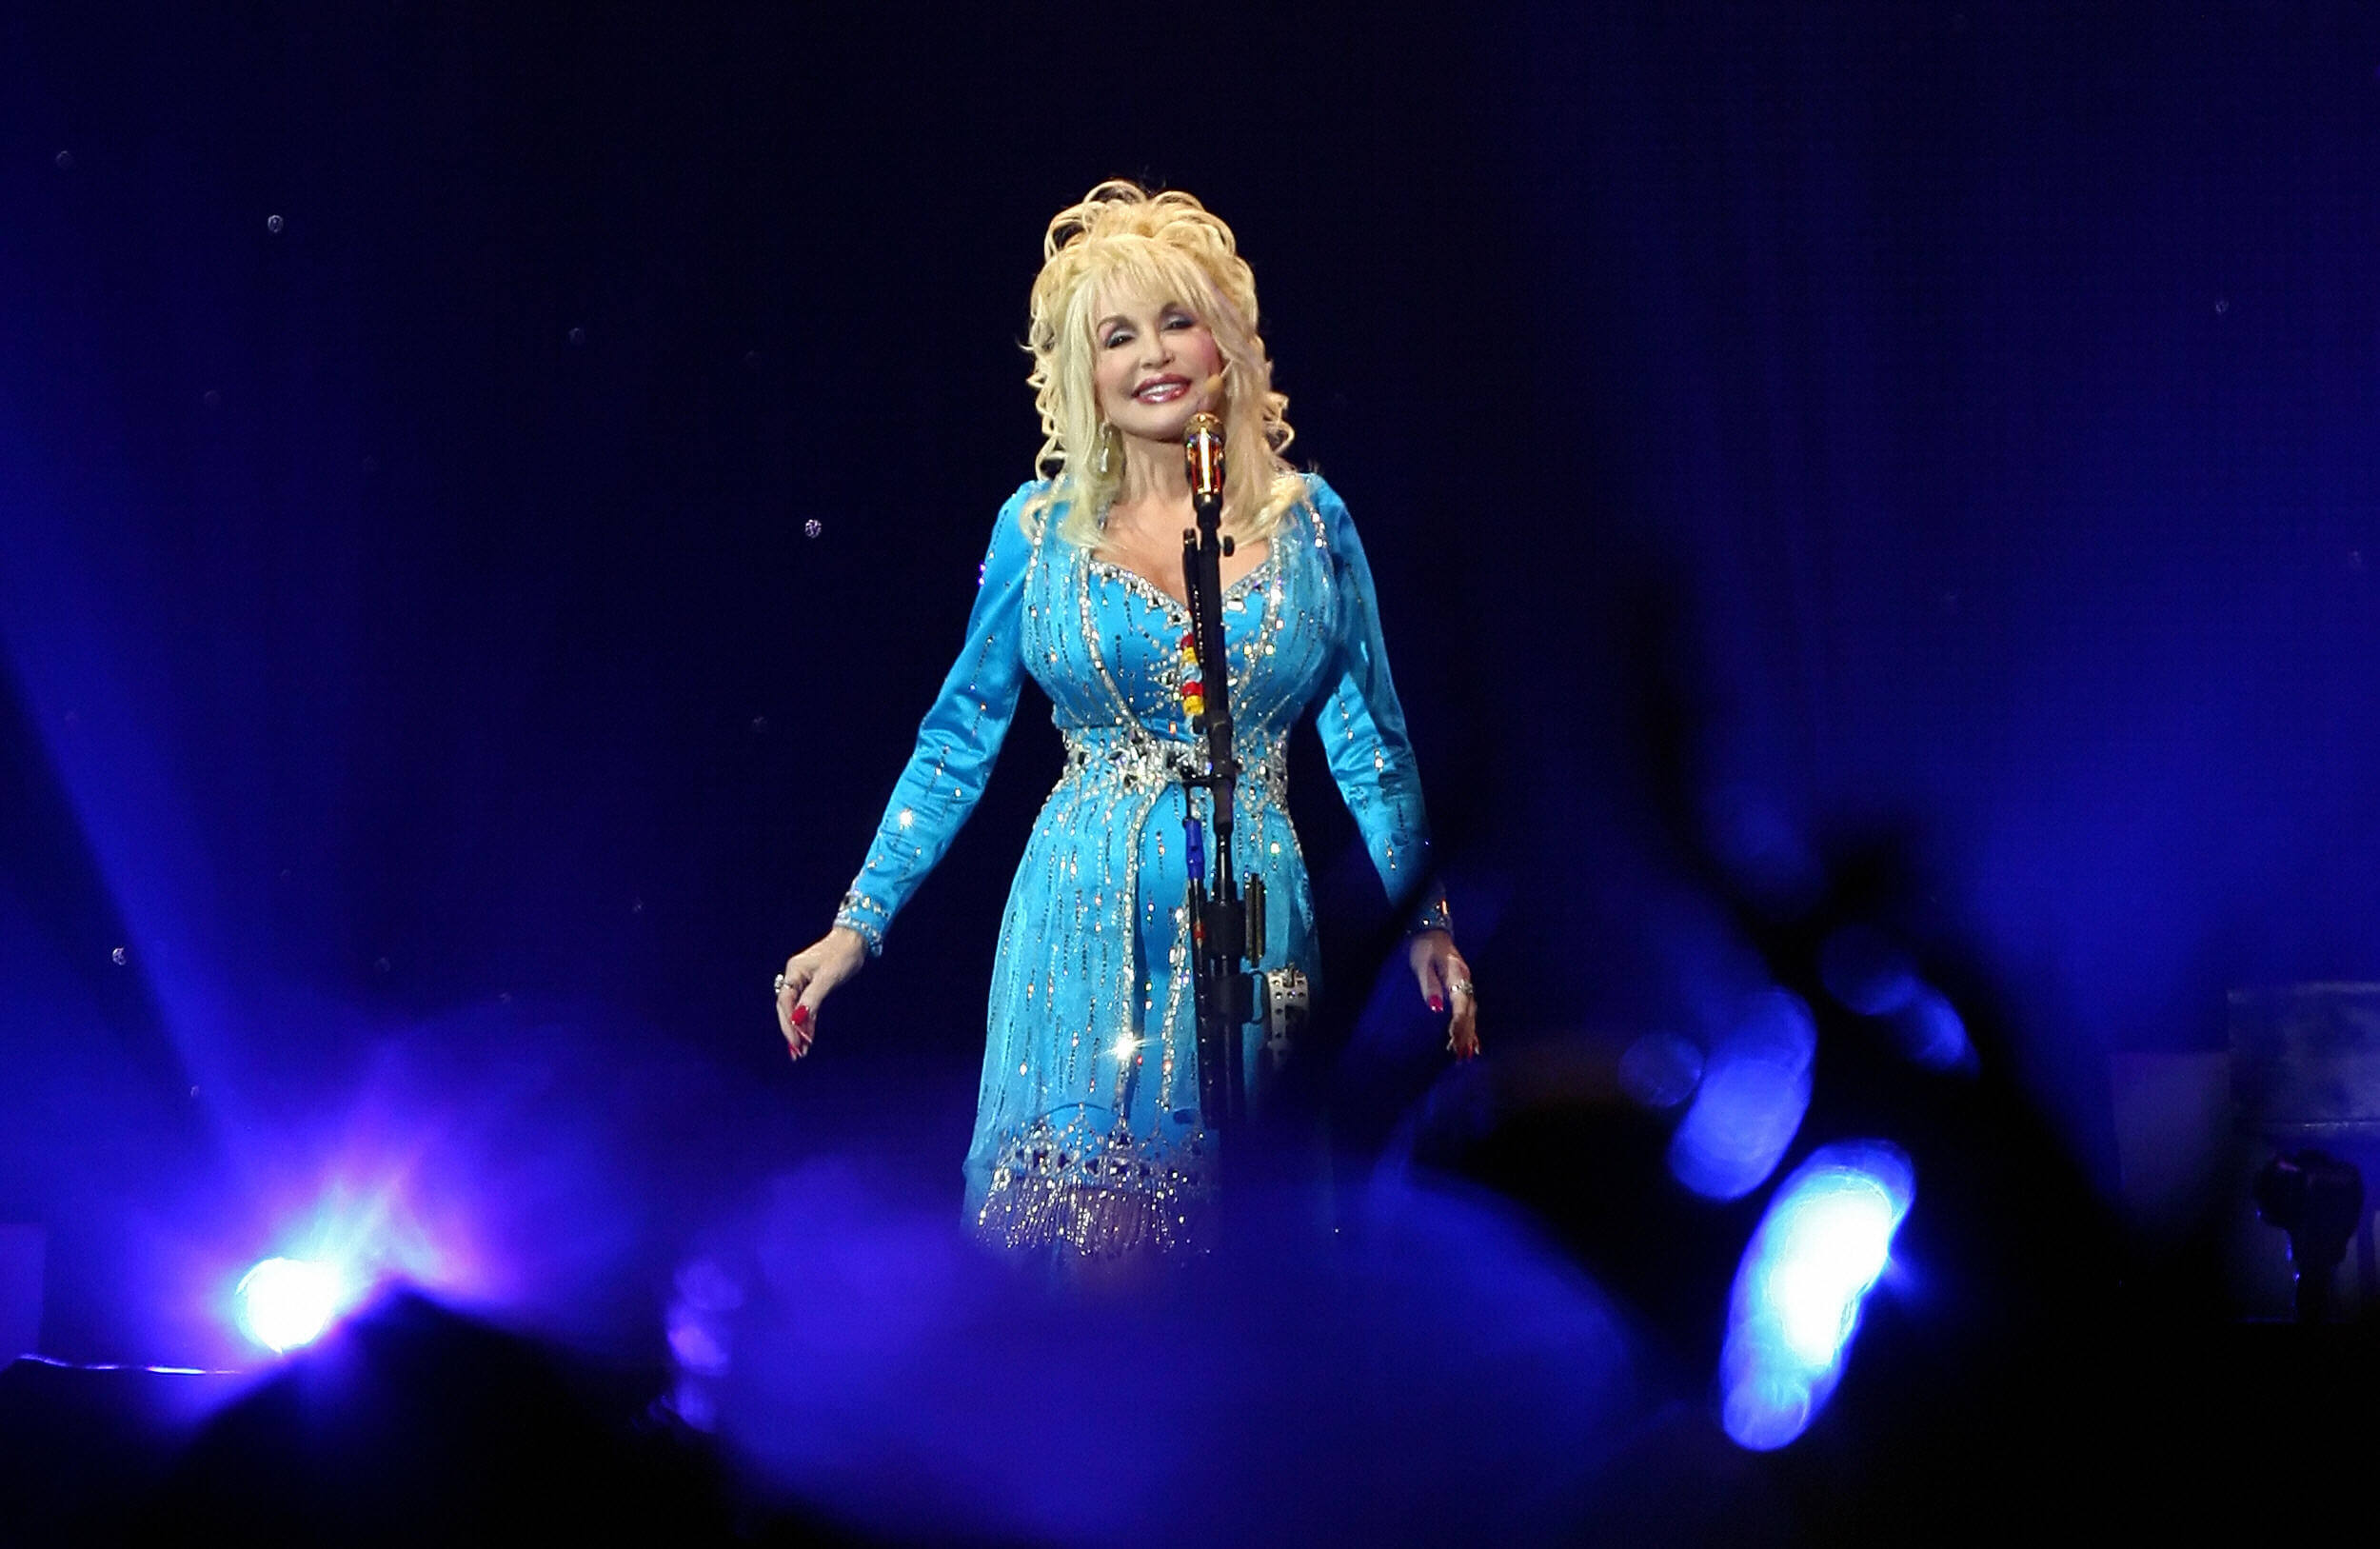 Dolly Parton performs onstage in London as part of her 'Backwoods Barbie' world tour